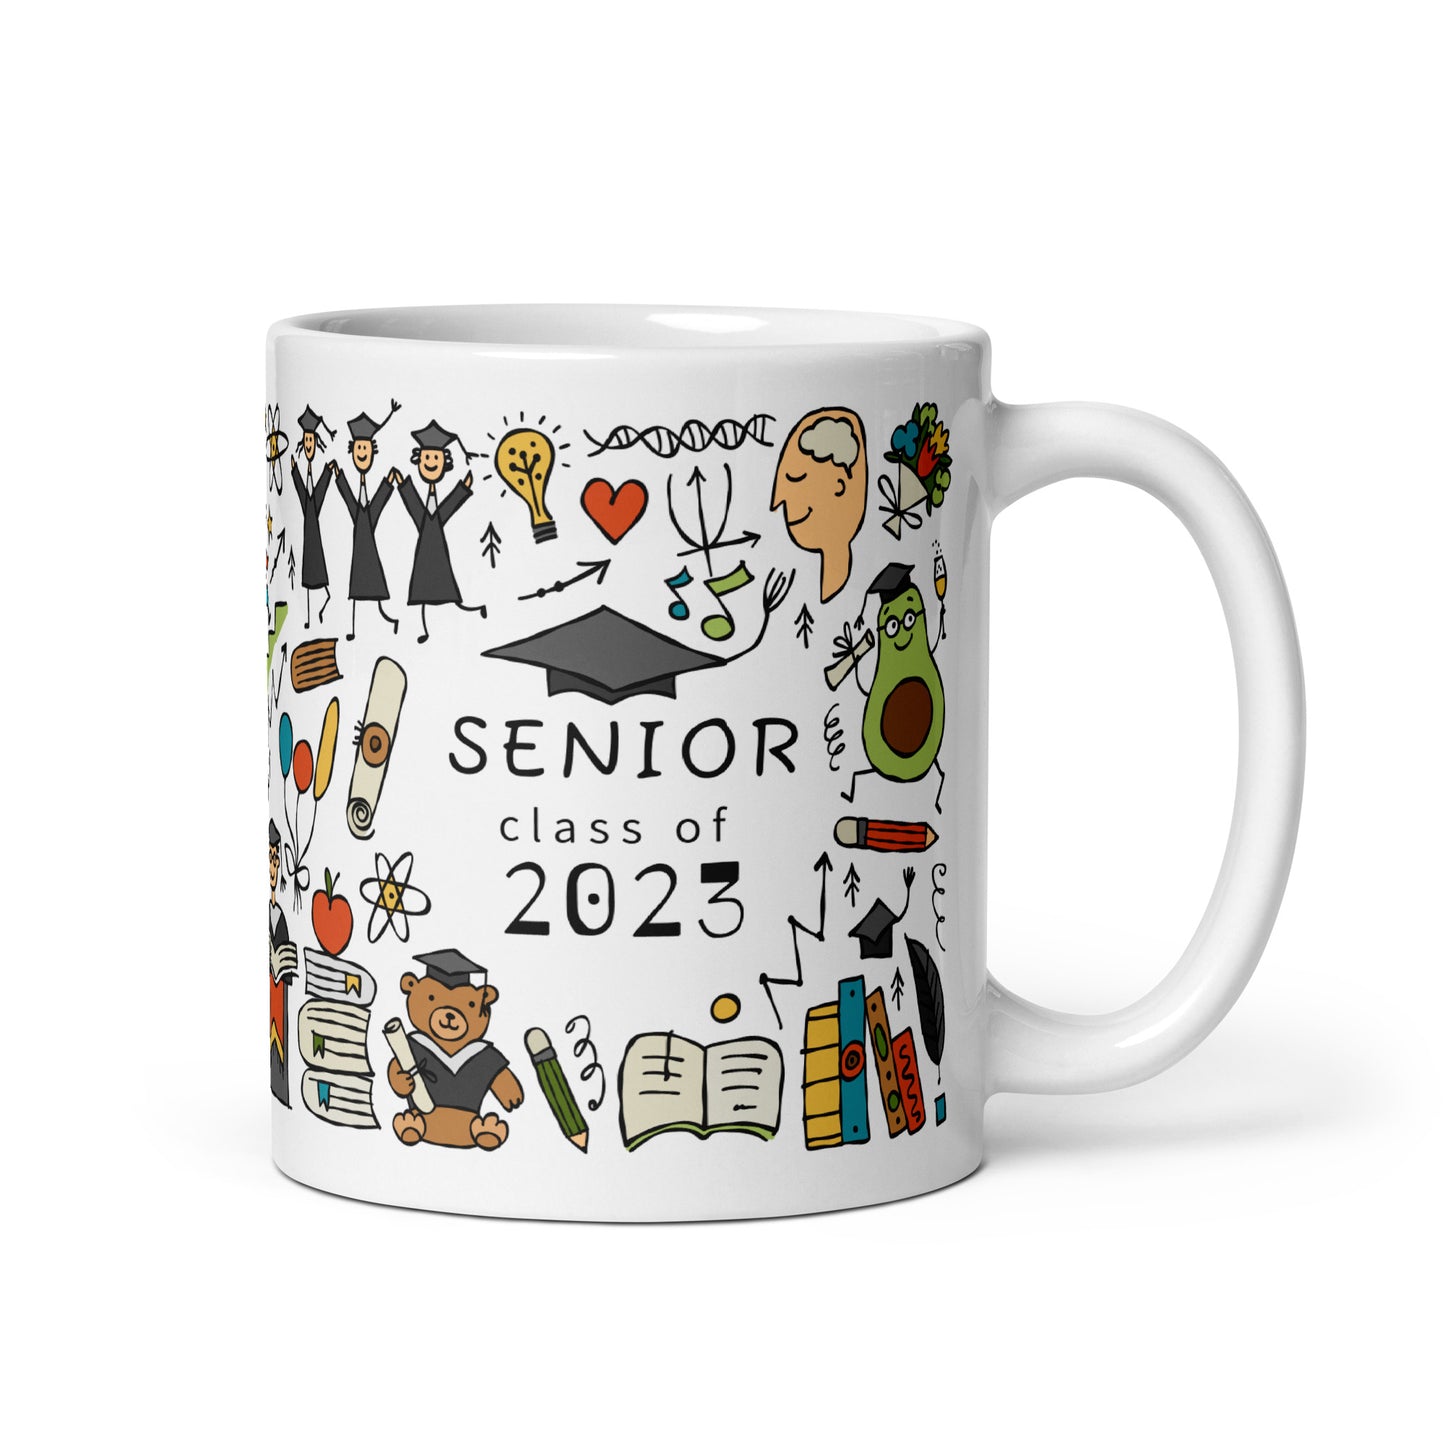 Personalised graduation mug 11oz with funny designer print featuring graduates in hats and mantles, school books and holiday motifs and graduation teddy bear